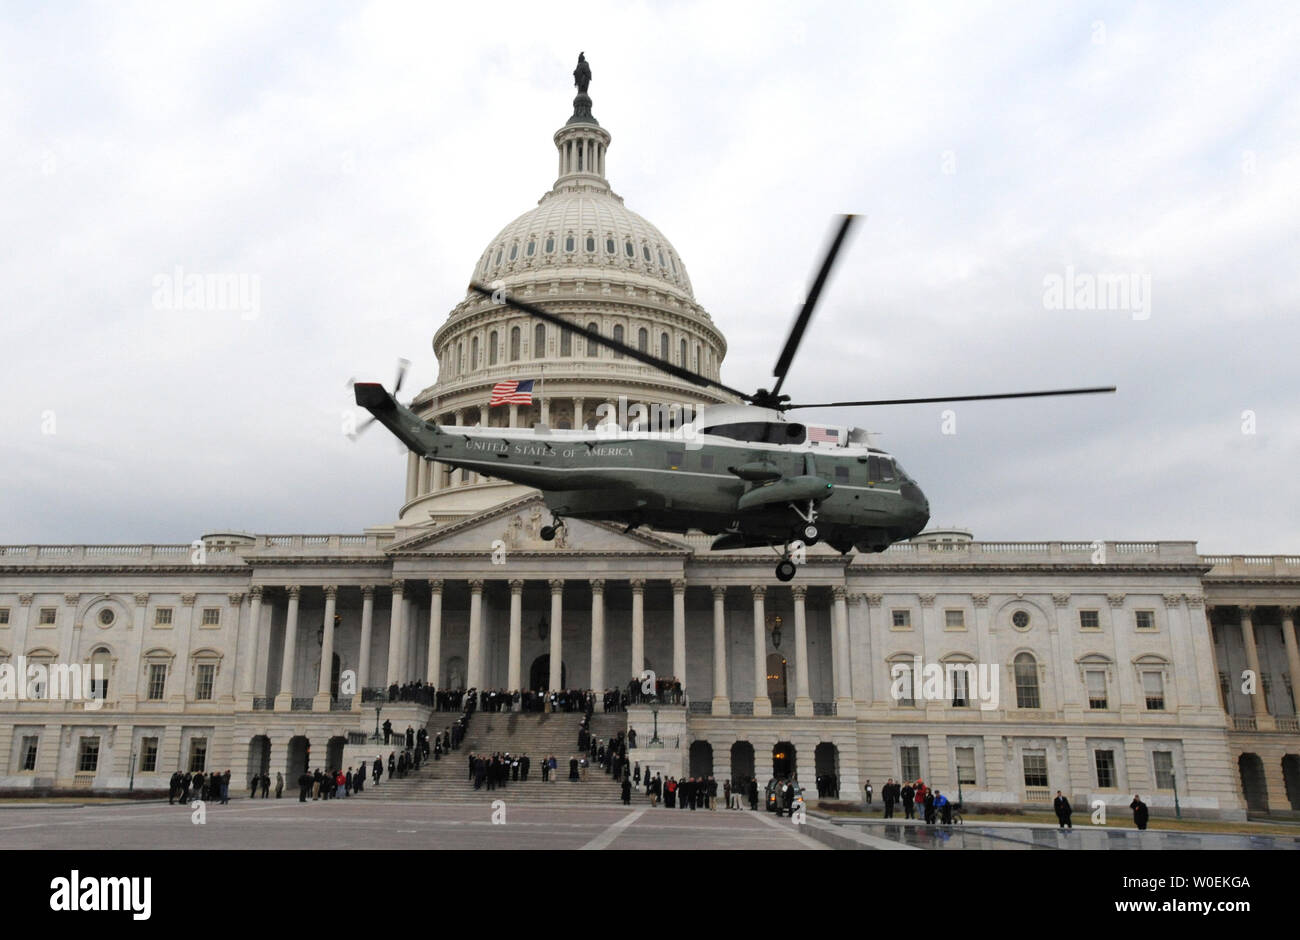 A U.S. military helicopter takes off carrying a stand-in for President George W. Bush as he leaves during a dress rehearsal of the Presidential Inauguration ceremony at the U.S. Capitol on January 11, 2009.  President-elect Barrack Obama will take the oath of office and become the 44th president of the United States on January 20, 2009.  Millions are expected in Washington for the event.  (UPI Photo/Pat Benic) Stock Photo